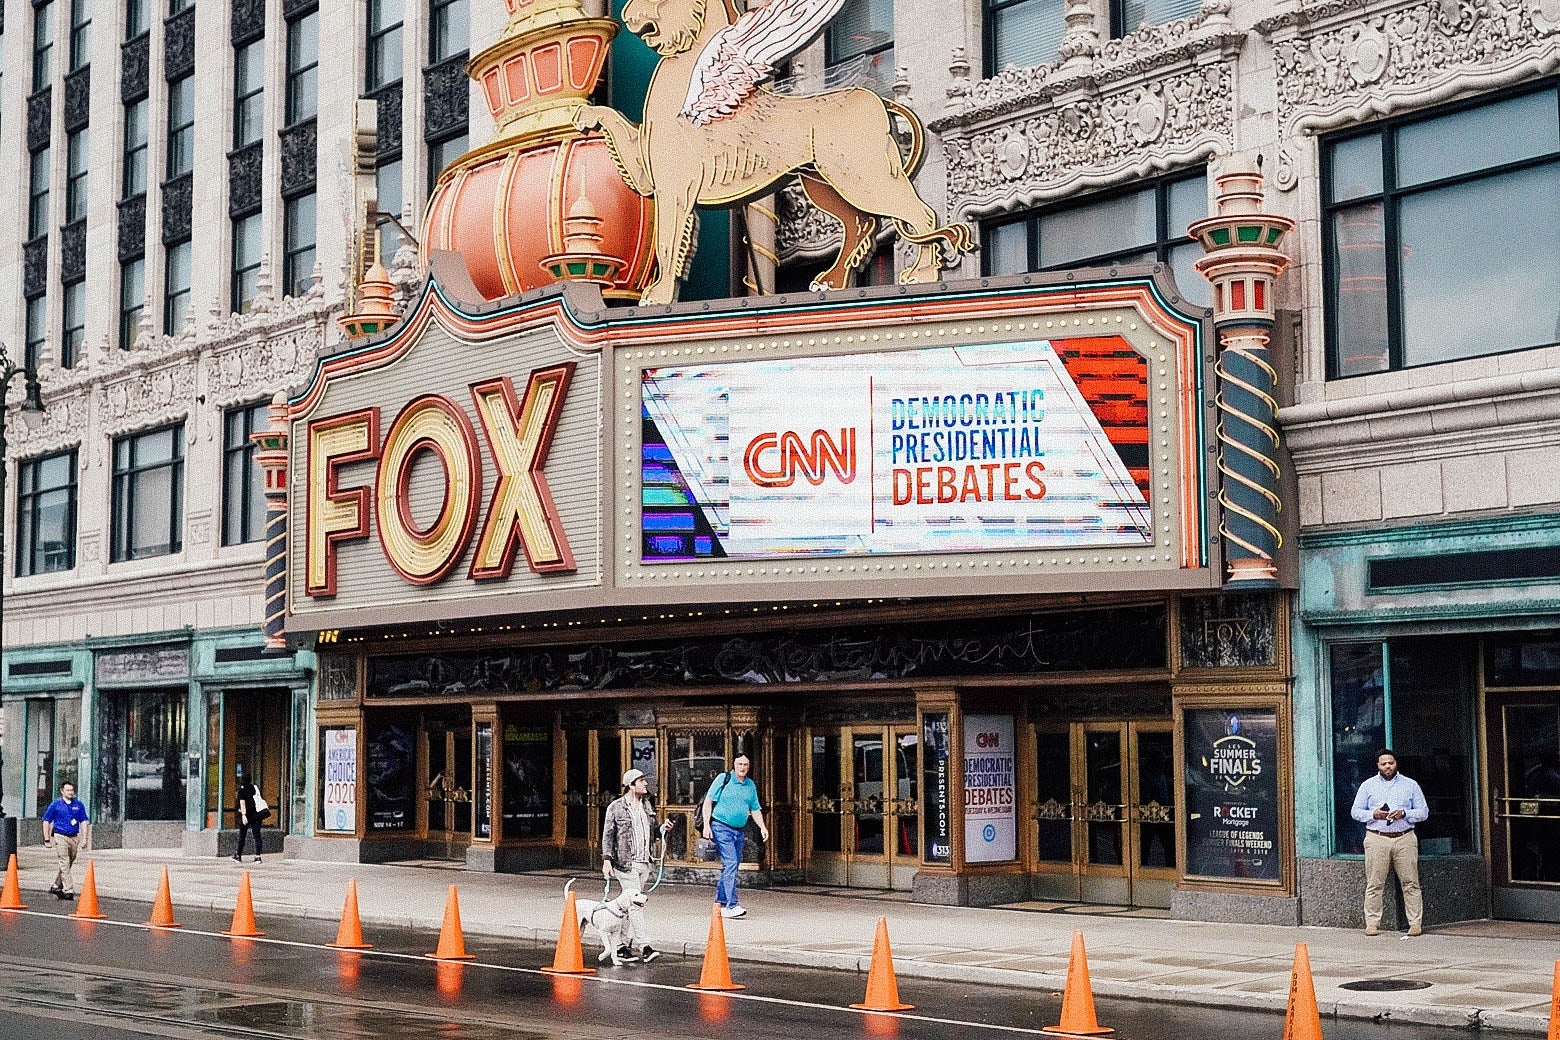 Fox Theatre in Detroit with the marquee advertising the debates.